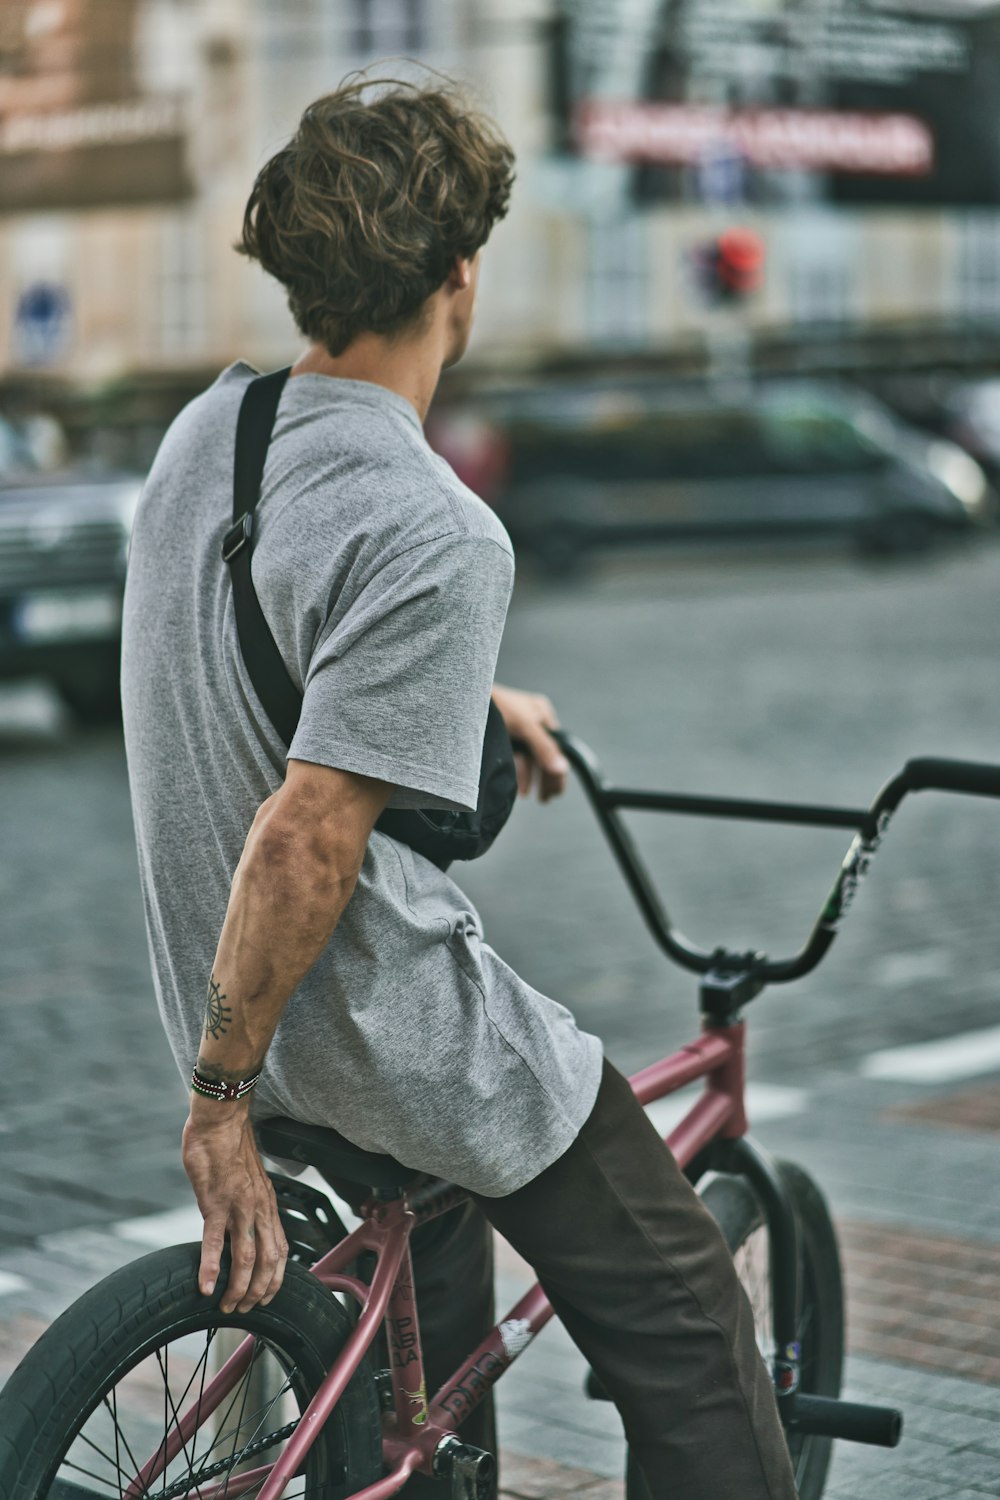 Man in gray t-shirt and gray shorts sitting on red bicycle during daytime  photo – Free Grey Image on Unsplash